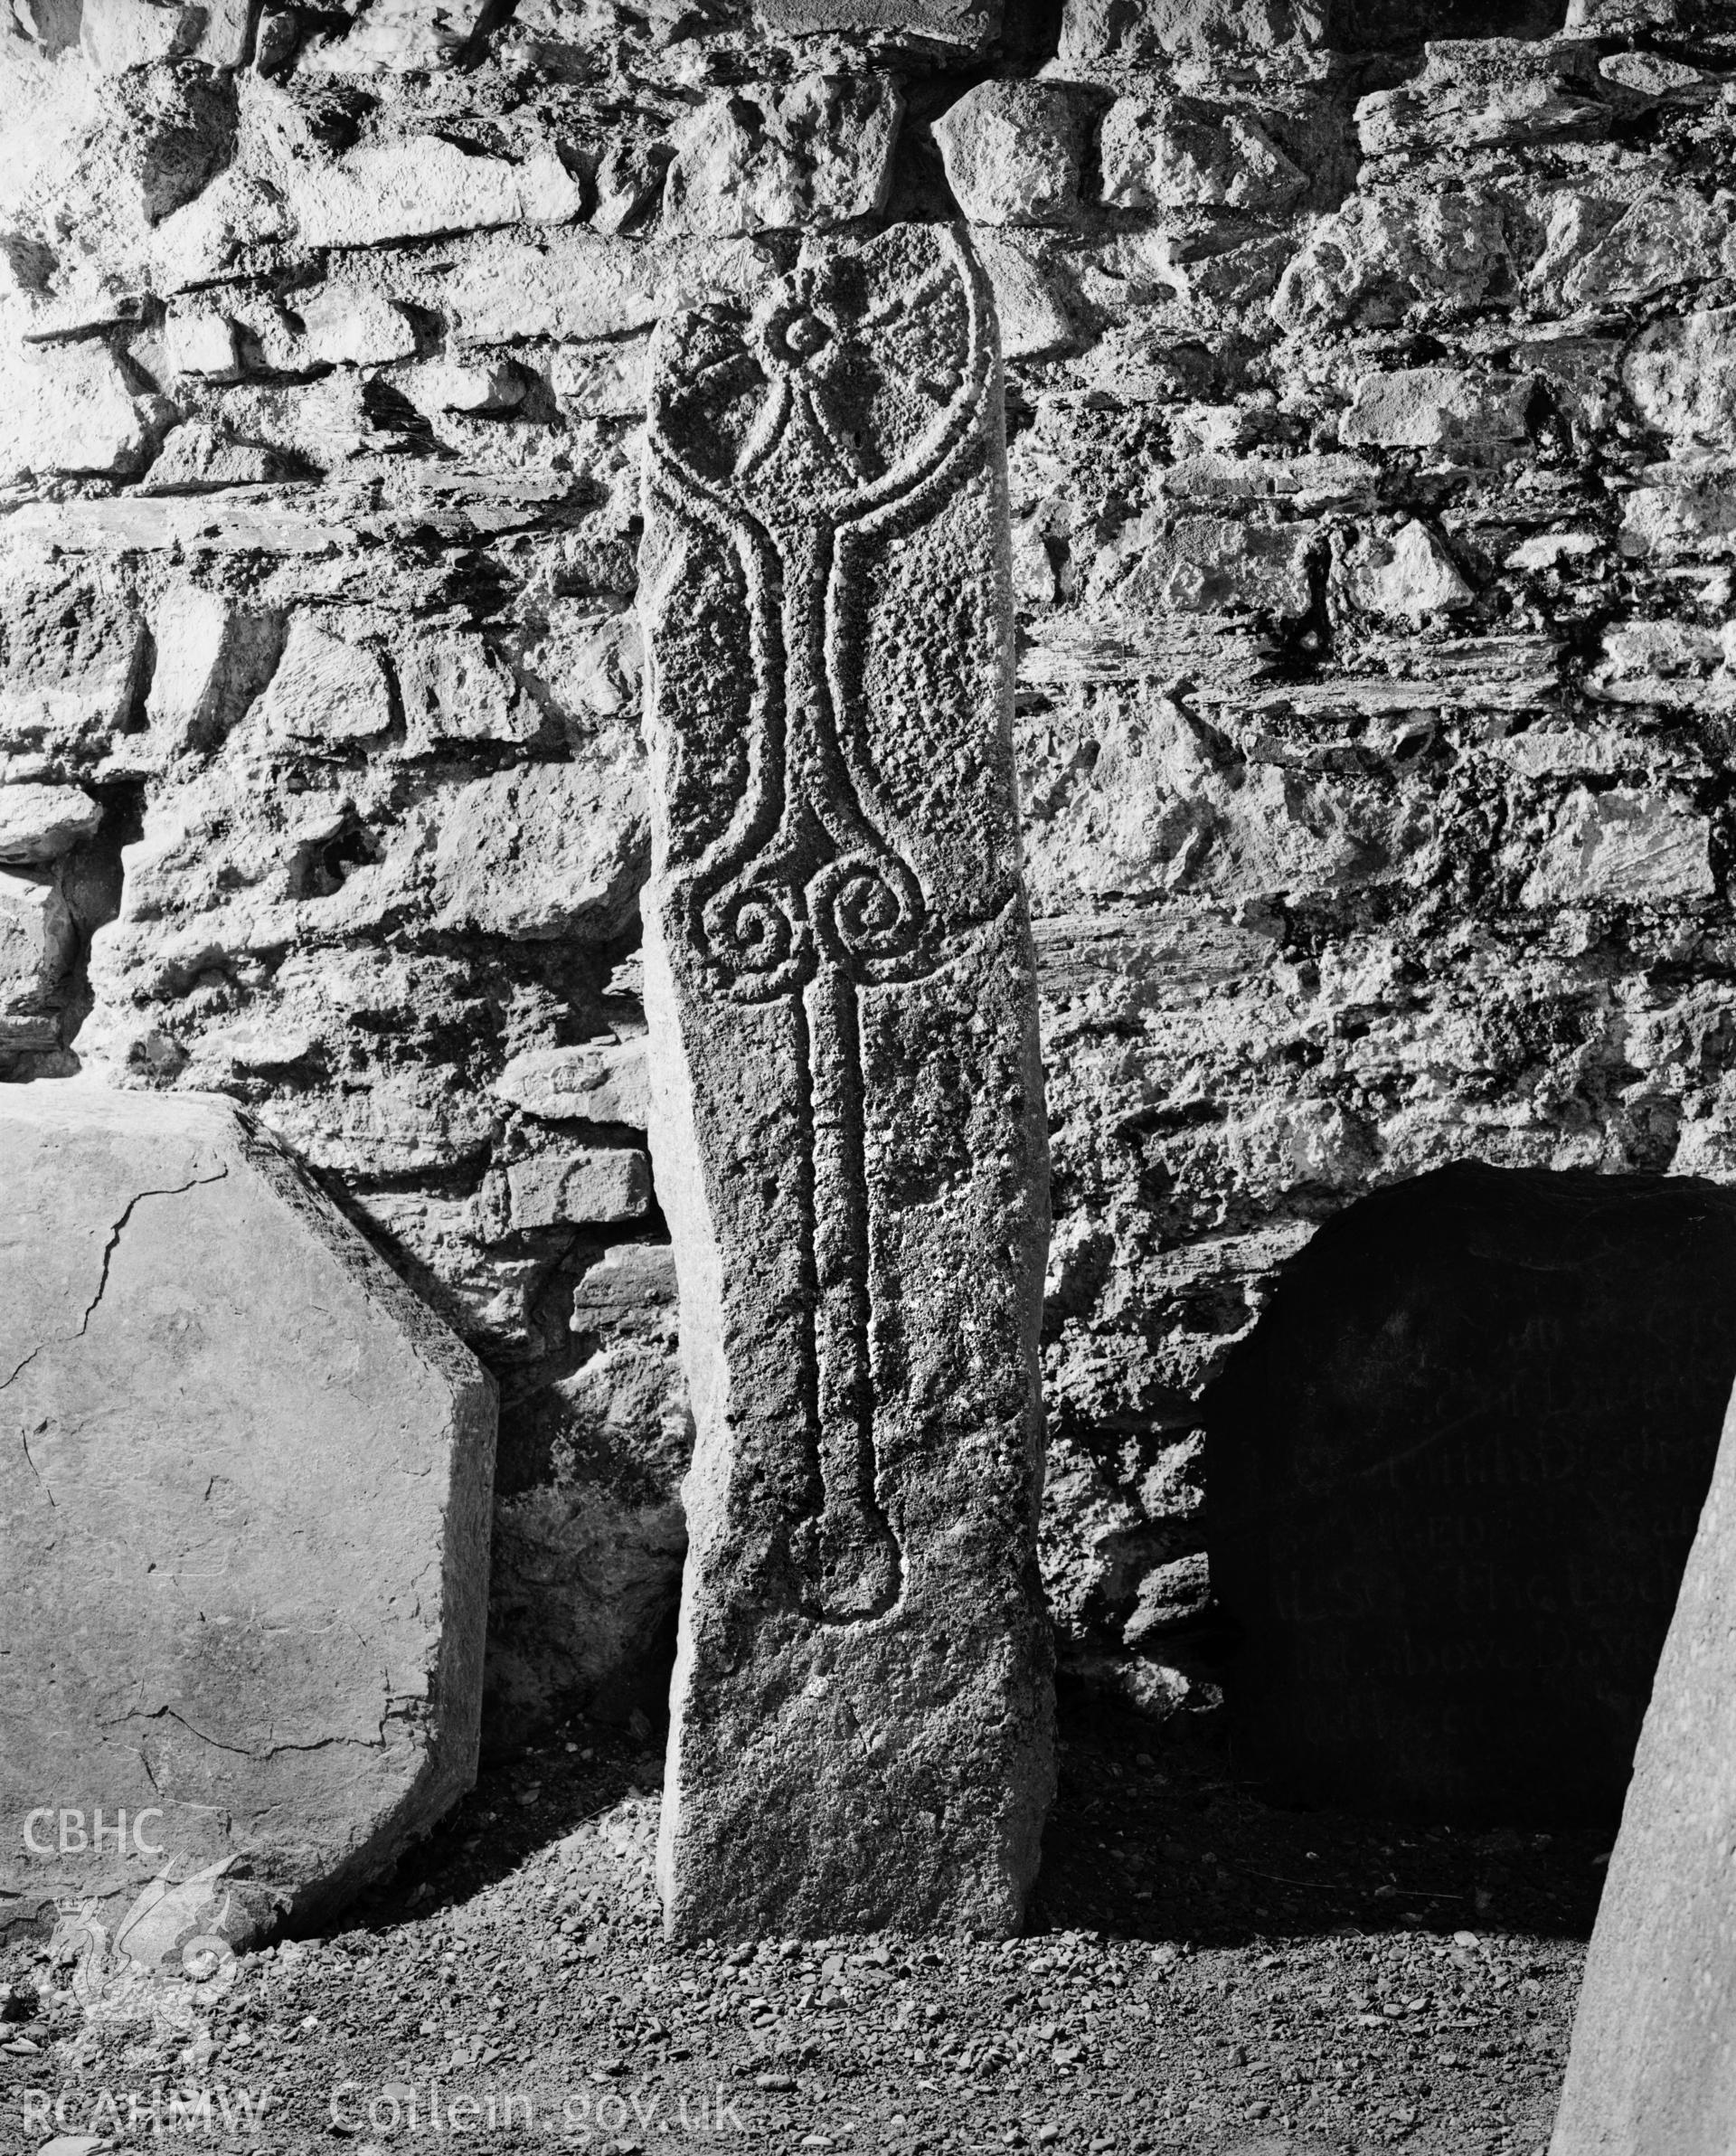 Digitised copy of an RCAHMW black and white photograph showing the Sagranus Stone,  at St Thomas's Church, St Dogmaels.